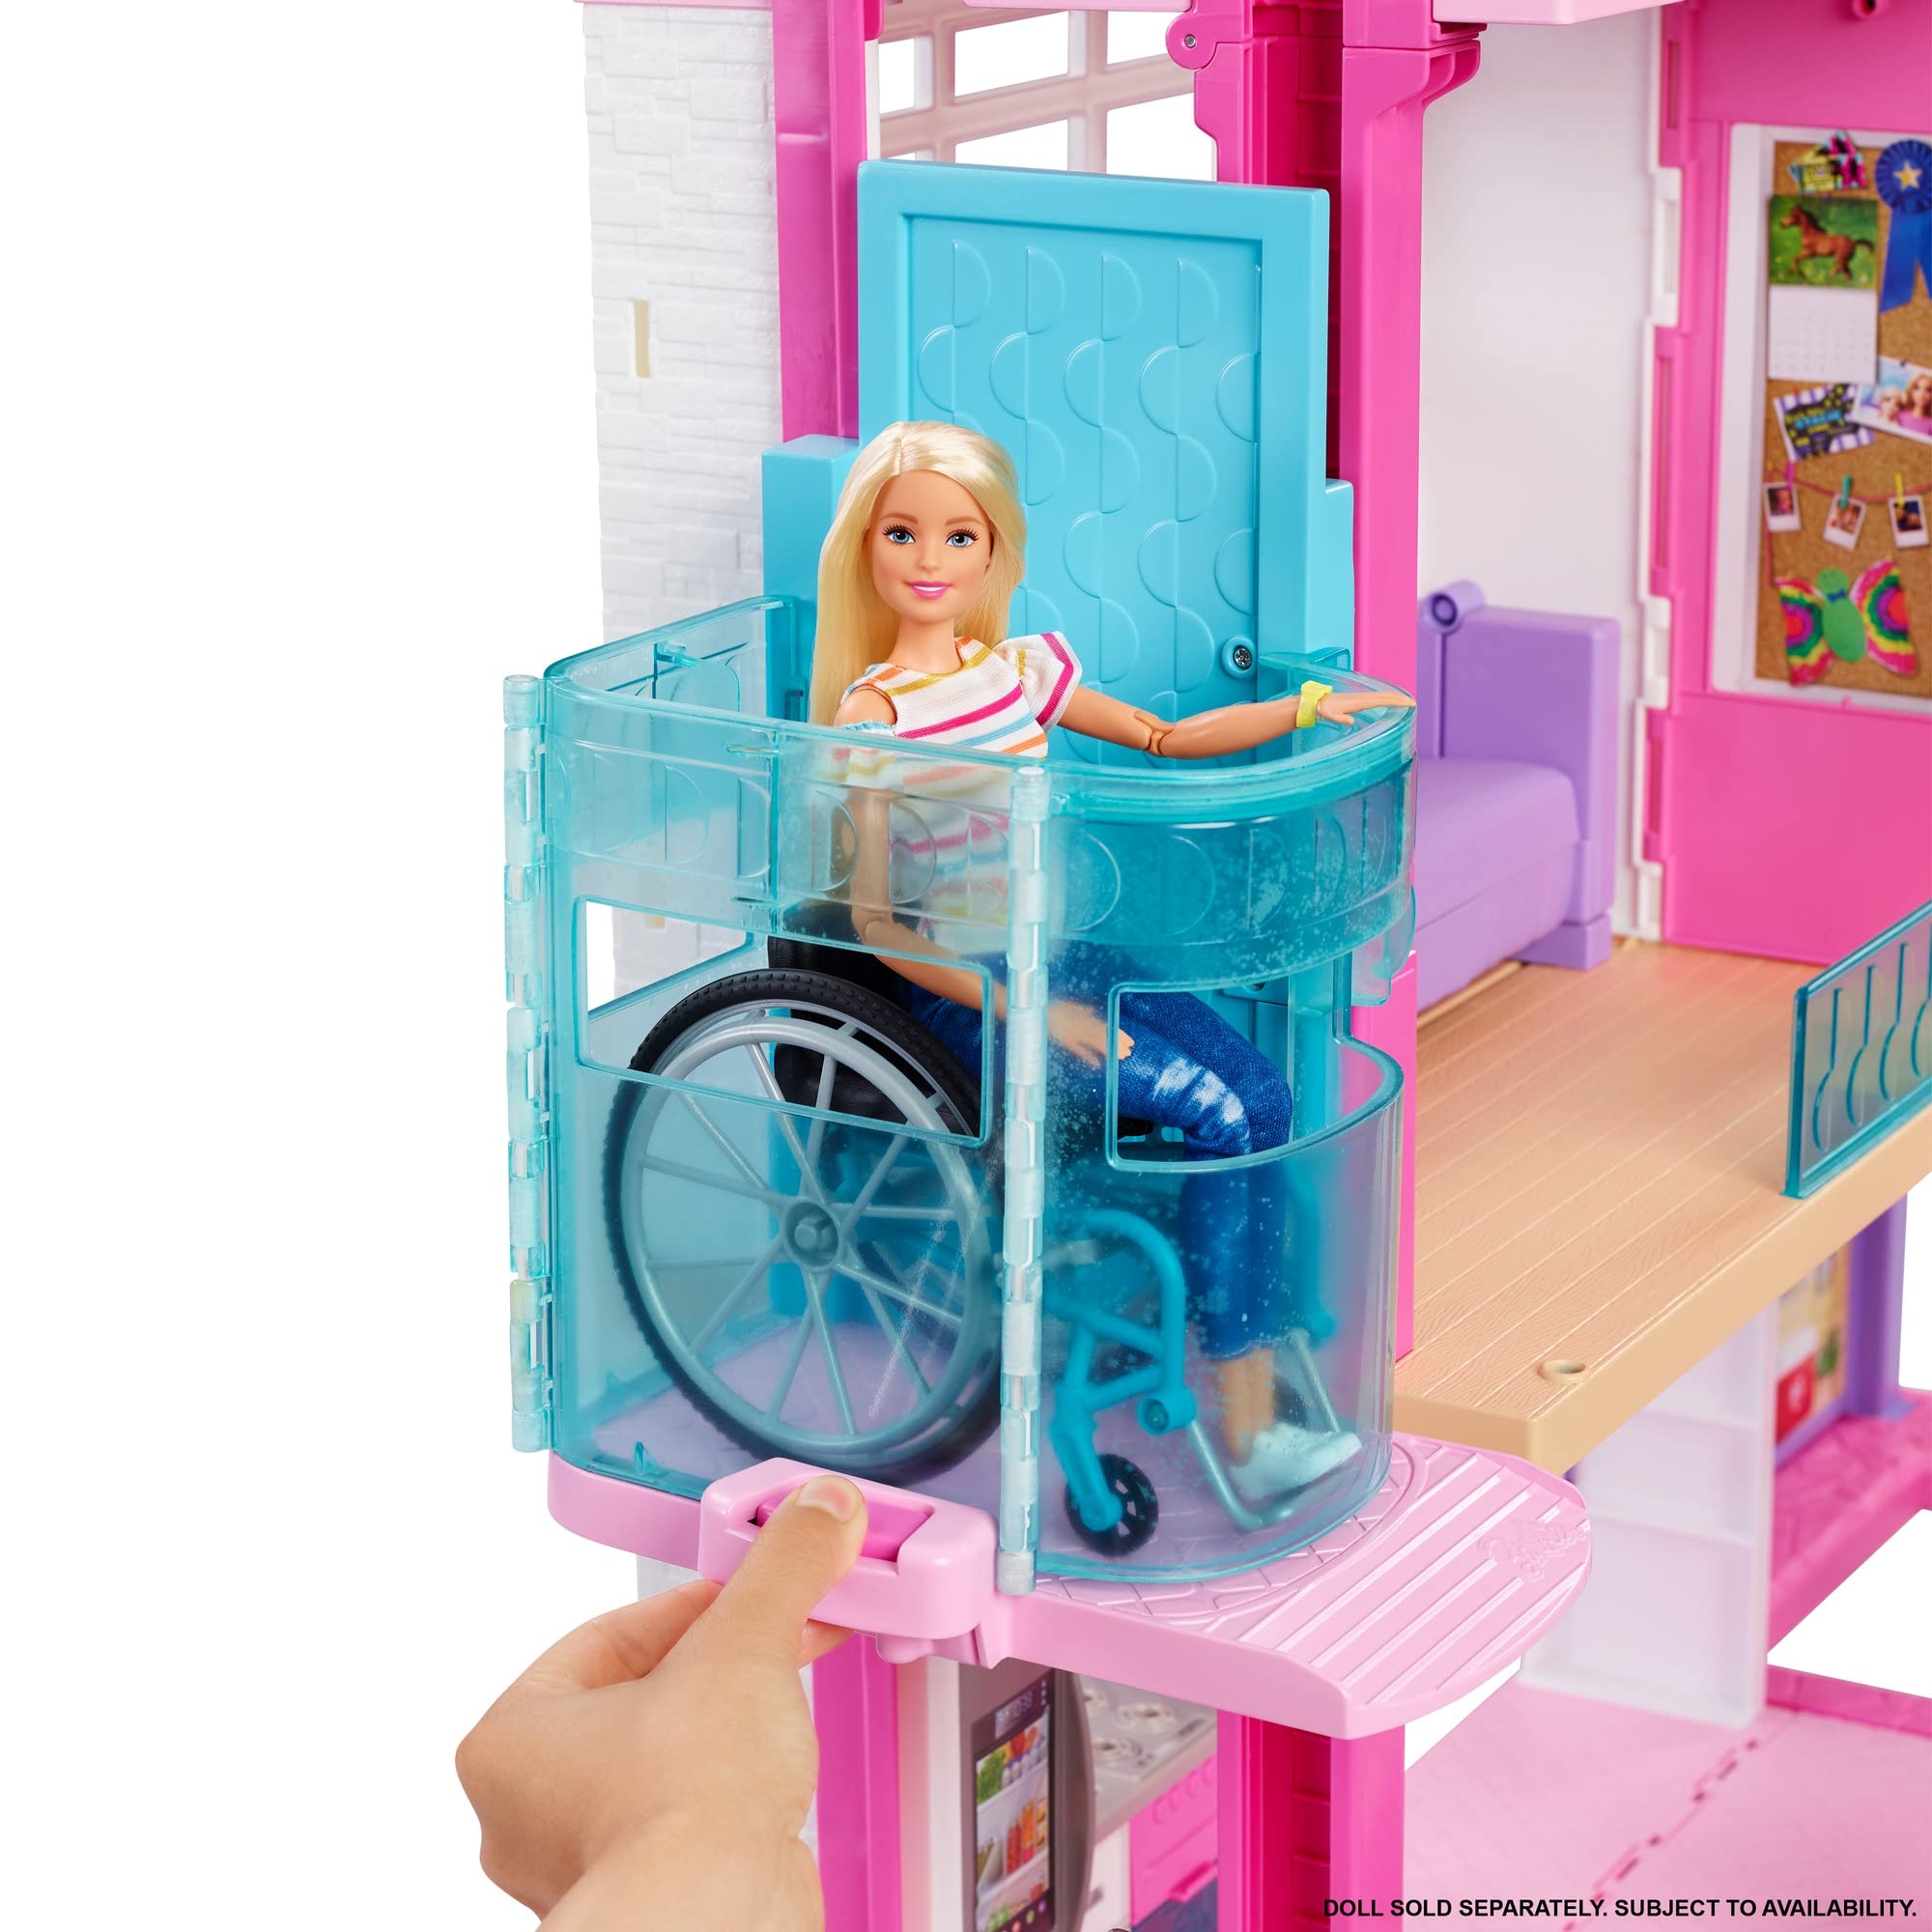 Barbie Dreamhouse, Doll House Playset with 70+ Accessories Including Transforming Furniture, Elevator, Slide, Lights & Sounds (Amazon Exclusive)